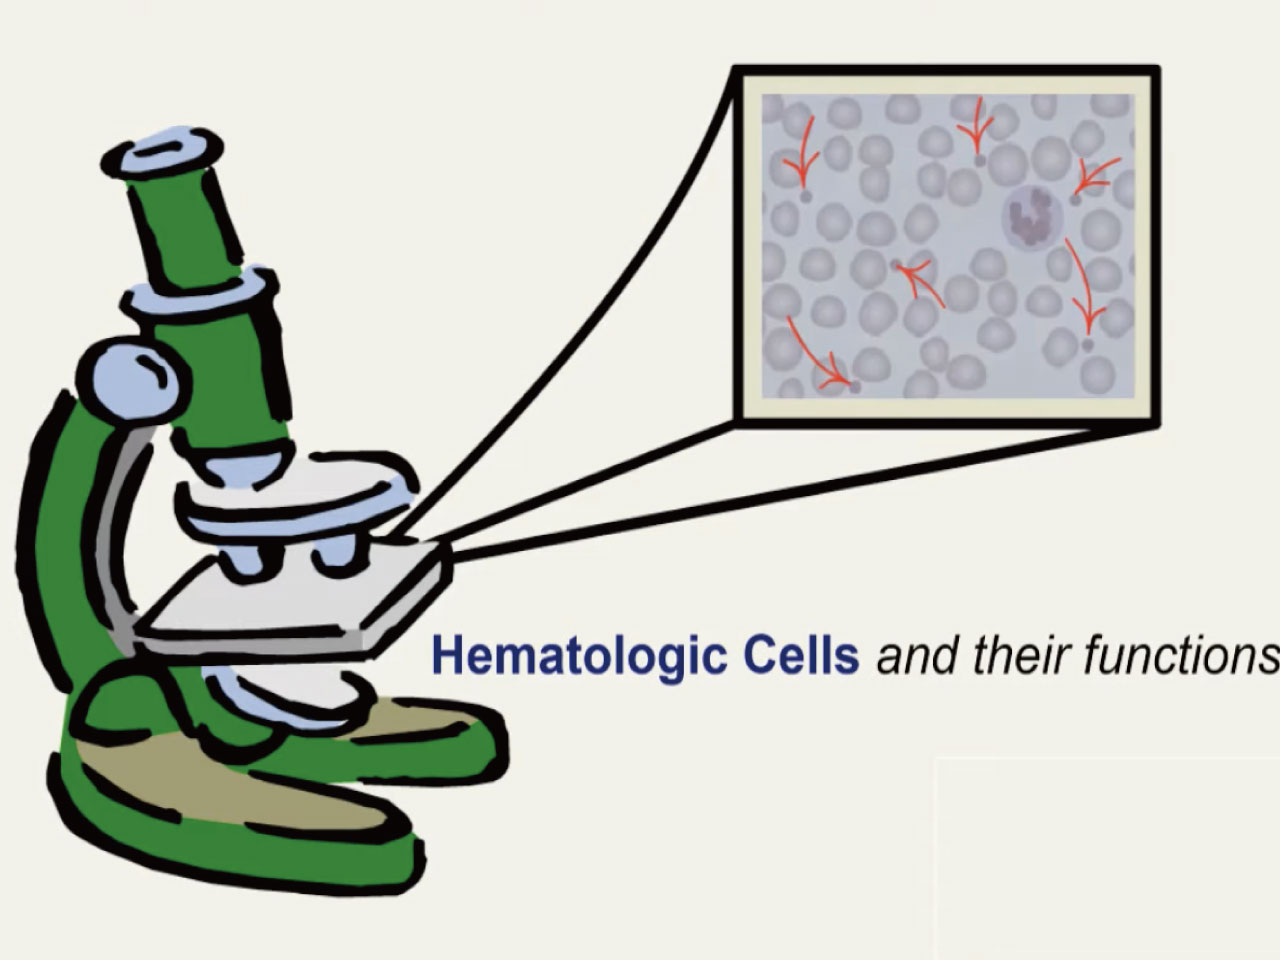 Hematologic Cells and their Functions: Blood Cell Identification